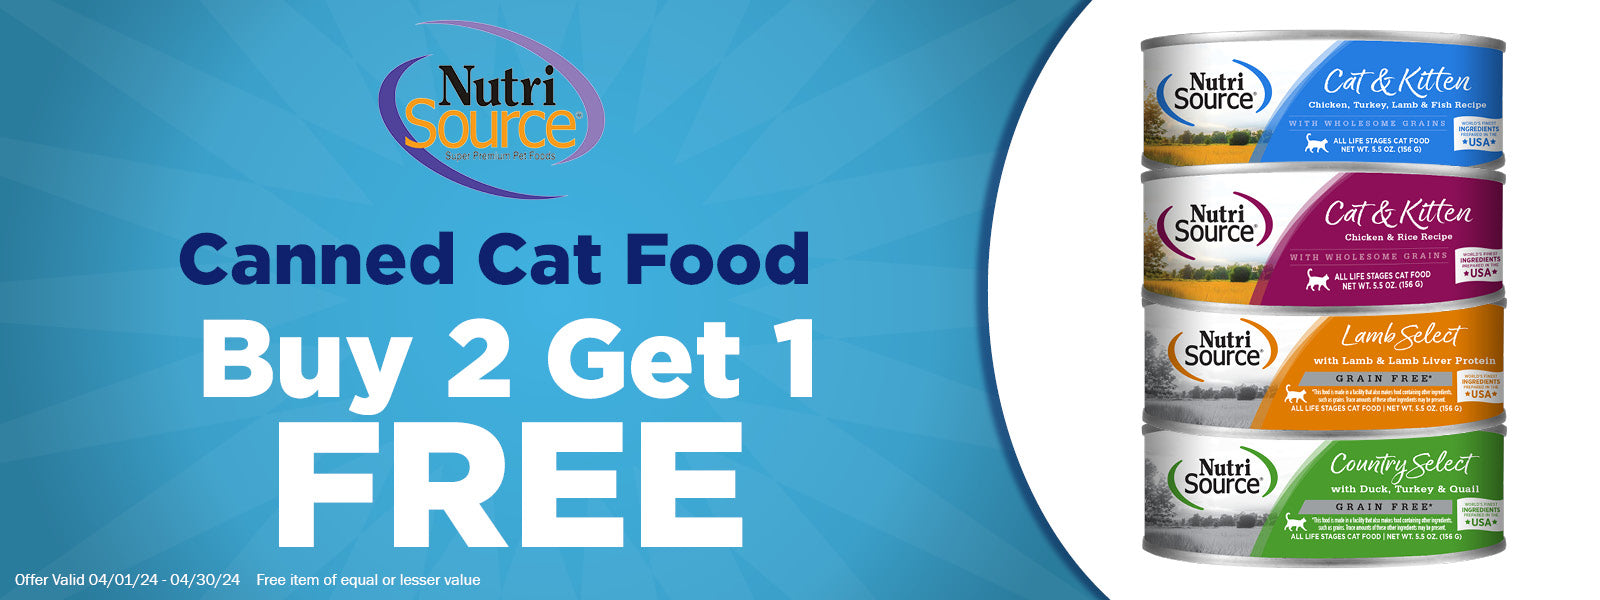 Nutrisource Canned Cat Food Buy 2 Get 1 Free